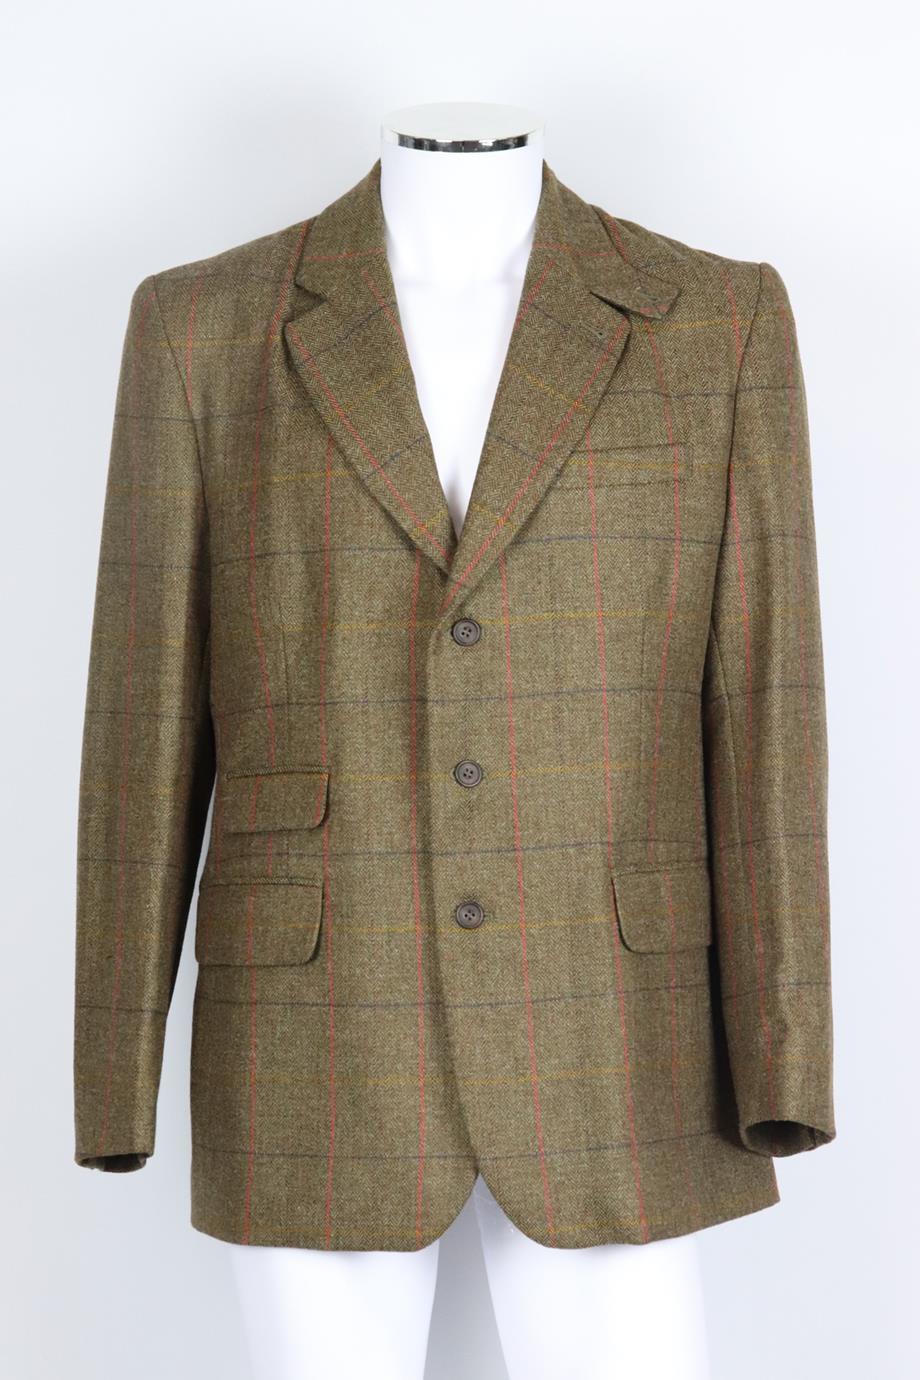 William & Son men's checked wool blend tweed blazer. Green, yellow and red. Long sleeve, v-neck. Button fastening at front. 100% Wool; lining: 100% viscose. Size: XLarge (IT 52, EU 52, UK/US Chest 42). Shoulder to shoulder: 18.5 in. Chest: 44 in.